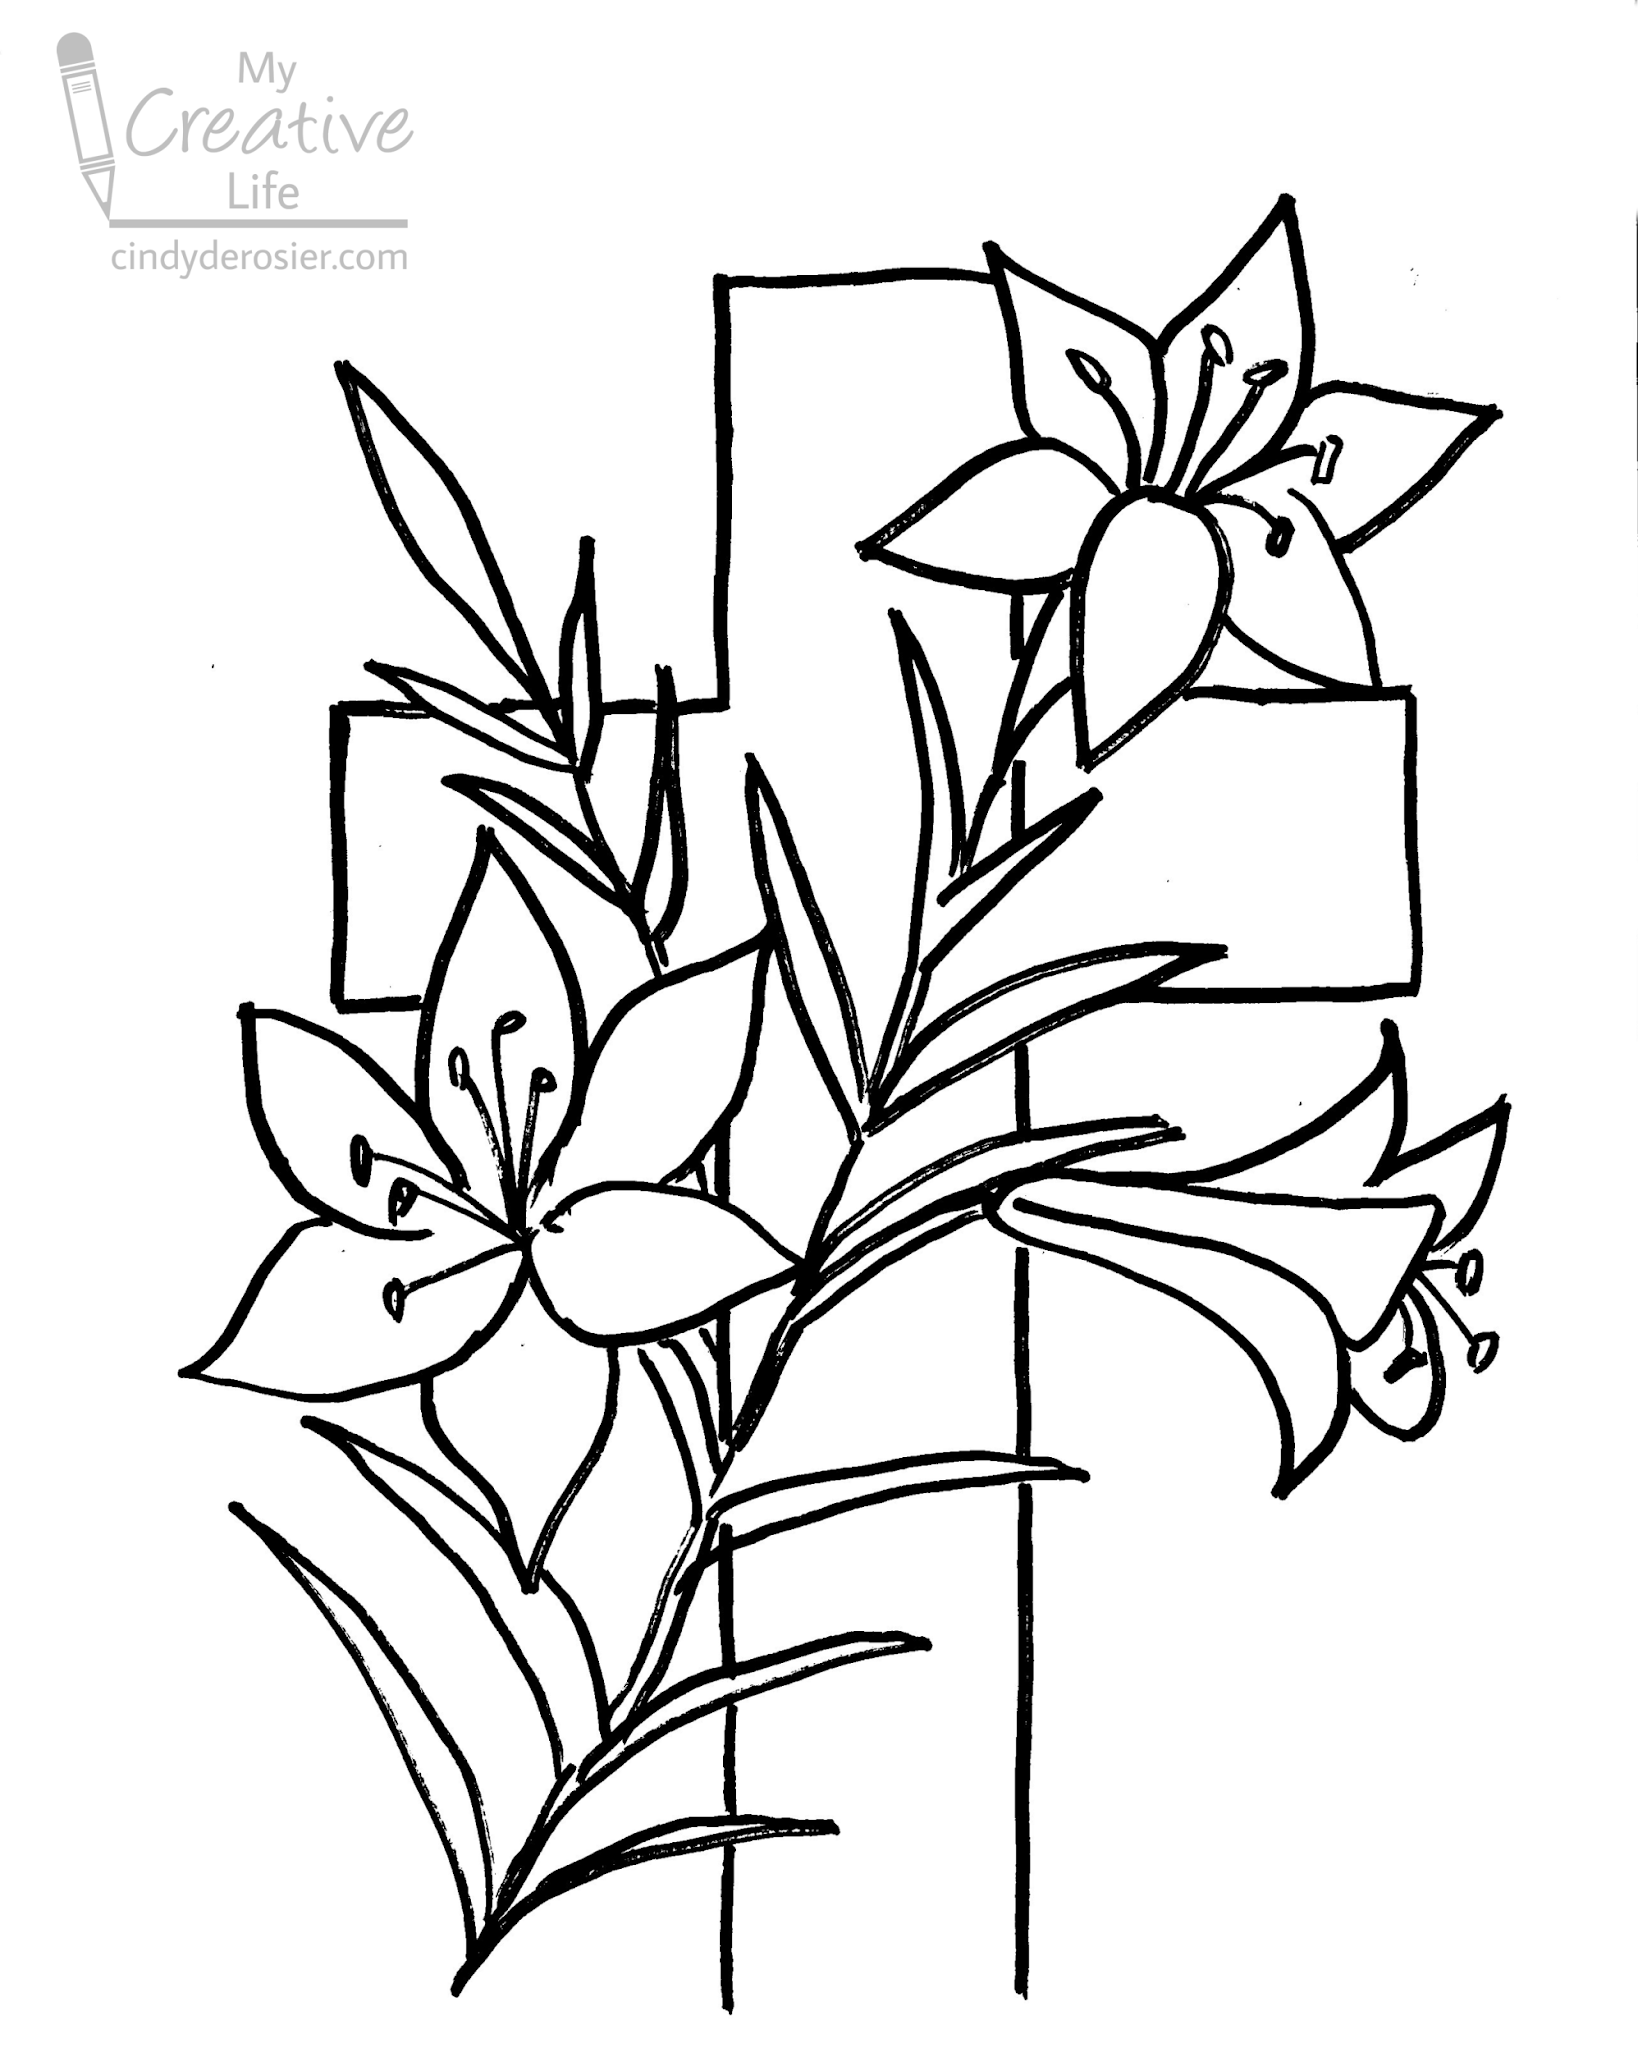 Cindy deRosier: My Creative Life: Drawing a Cross with Easter Lilies